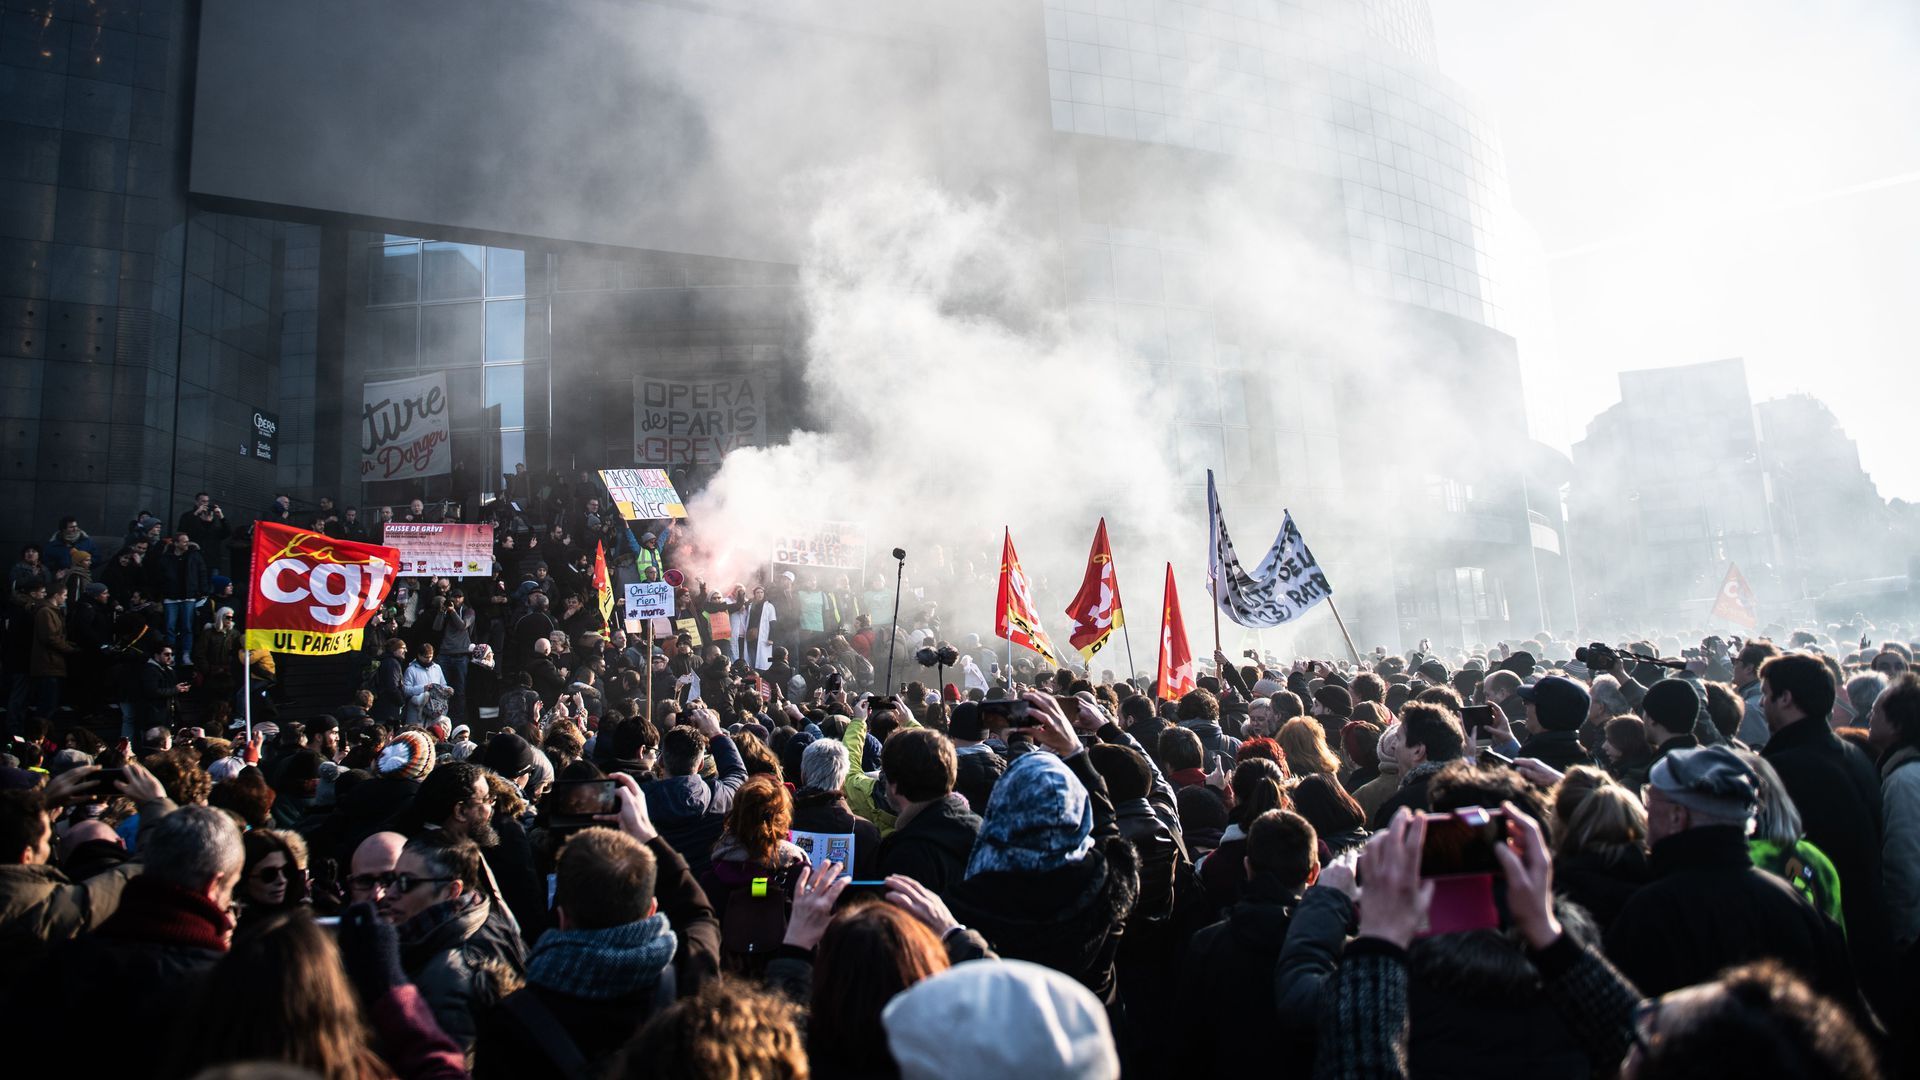 In this image, a large crowd of French protestors raise flags amid smoke 